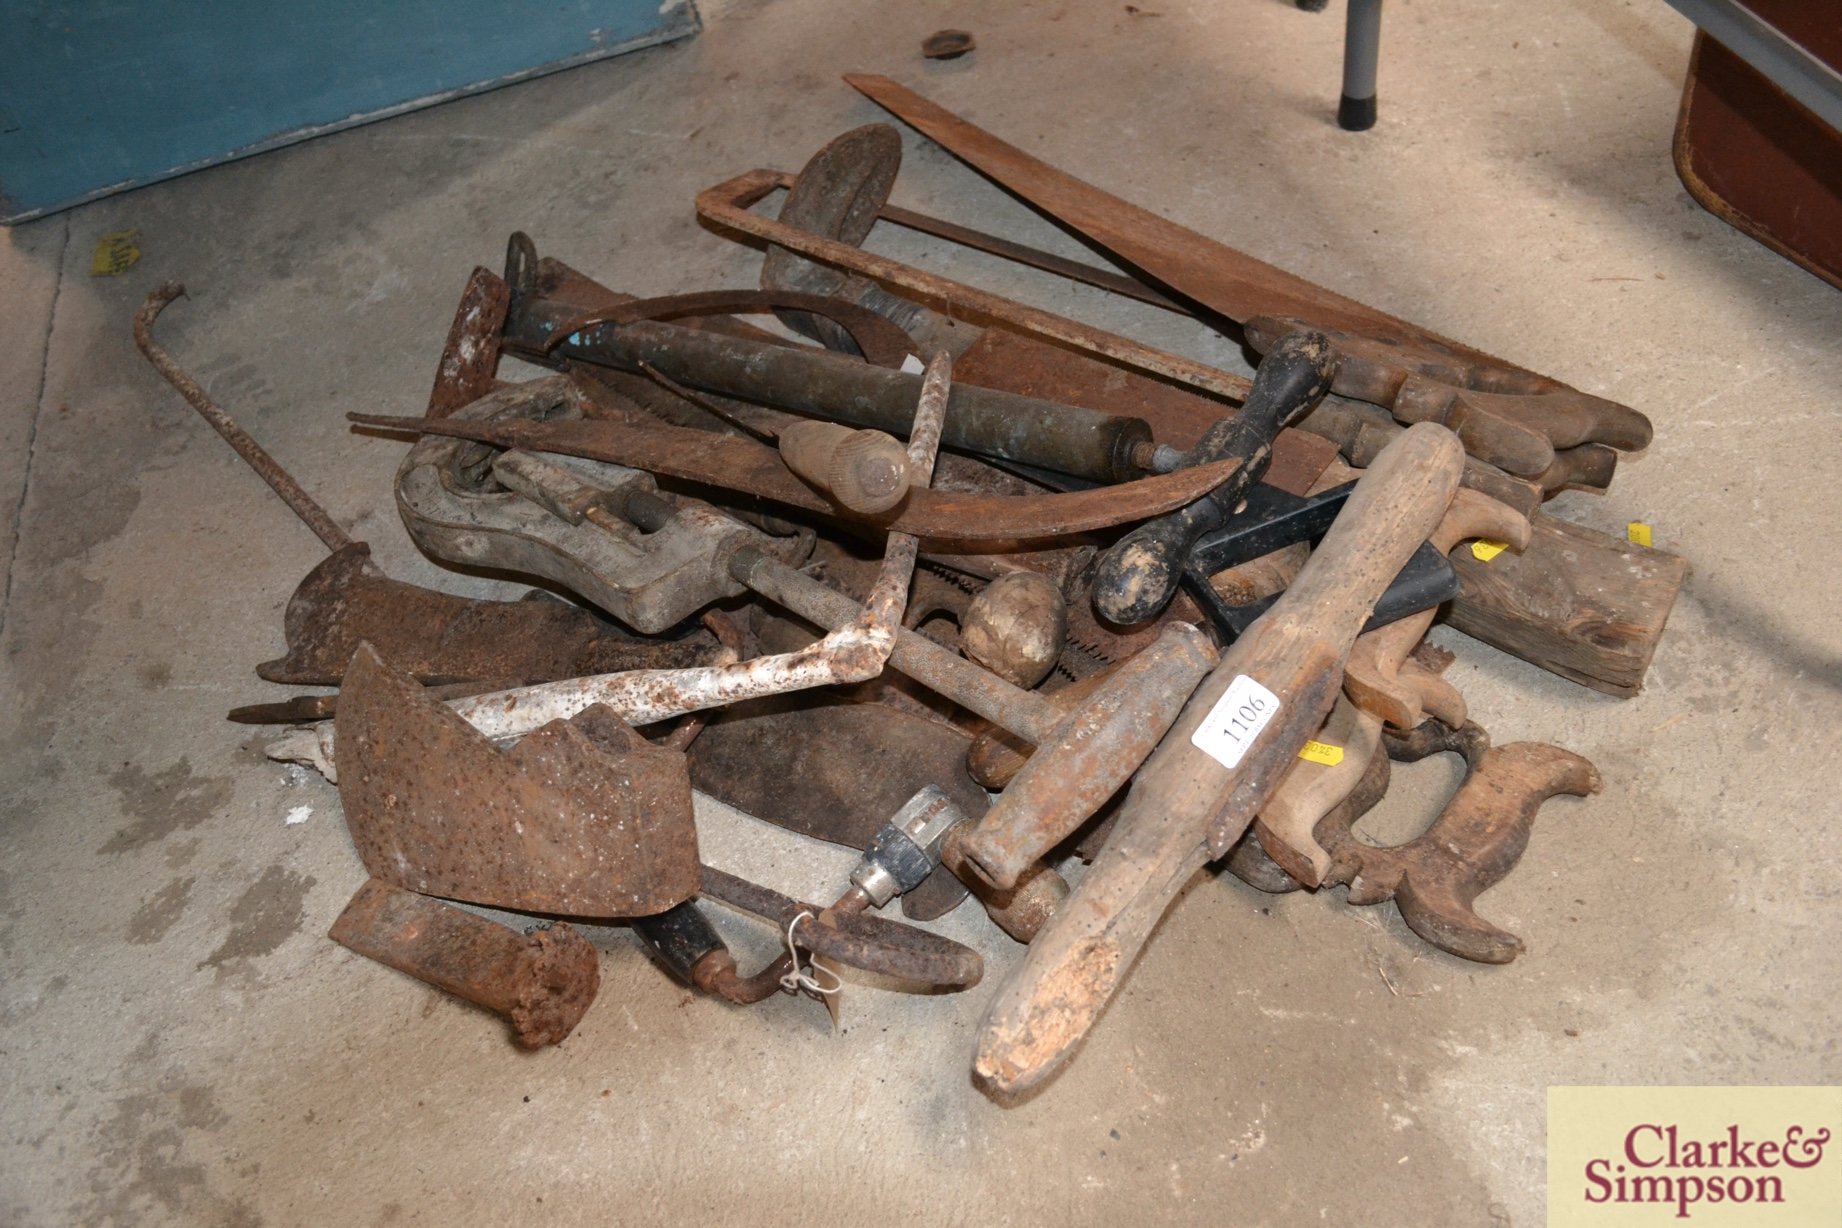 A quantity of saws, stirrup pump, axe heads, other